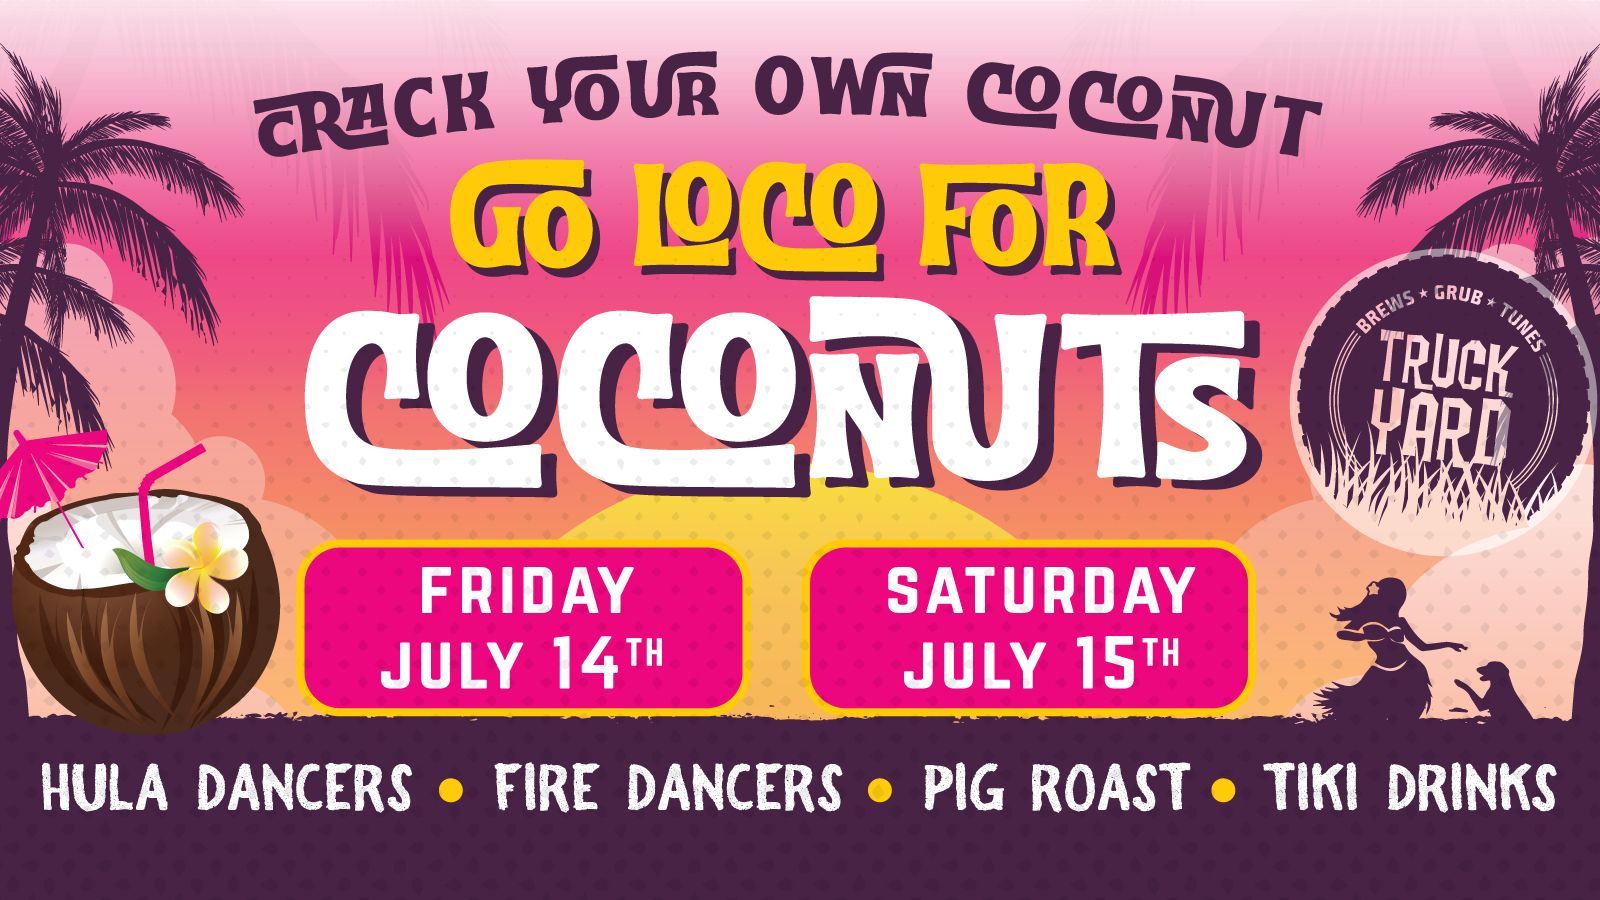 2307-TY-Loco-For-Coconut-Party-eventbrite.jpg